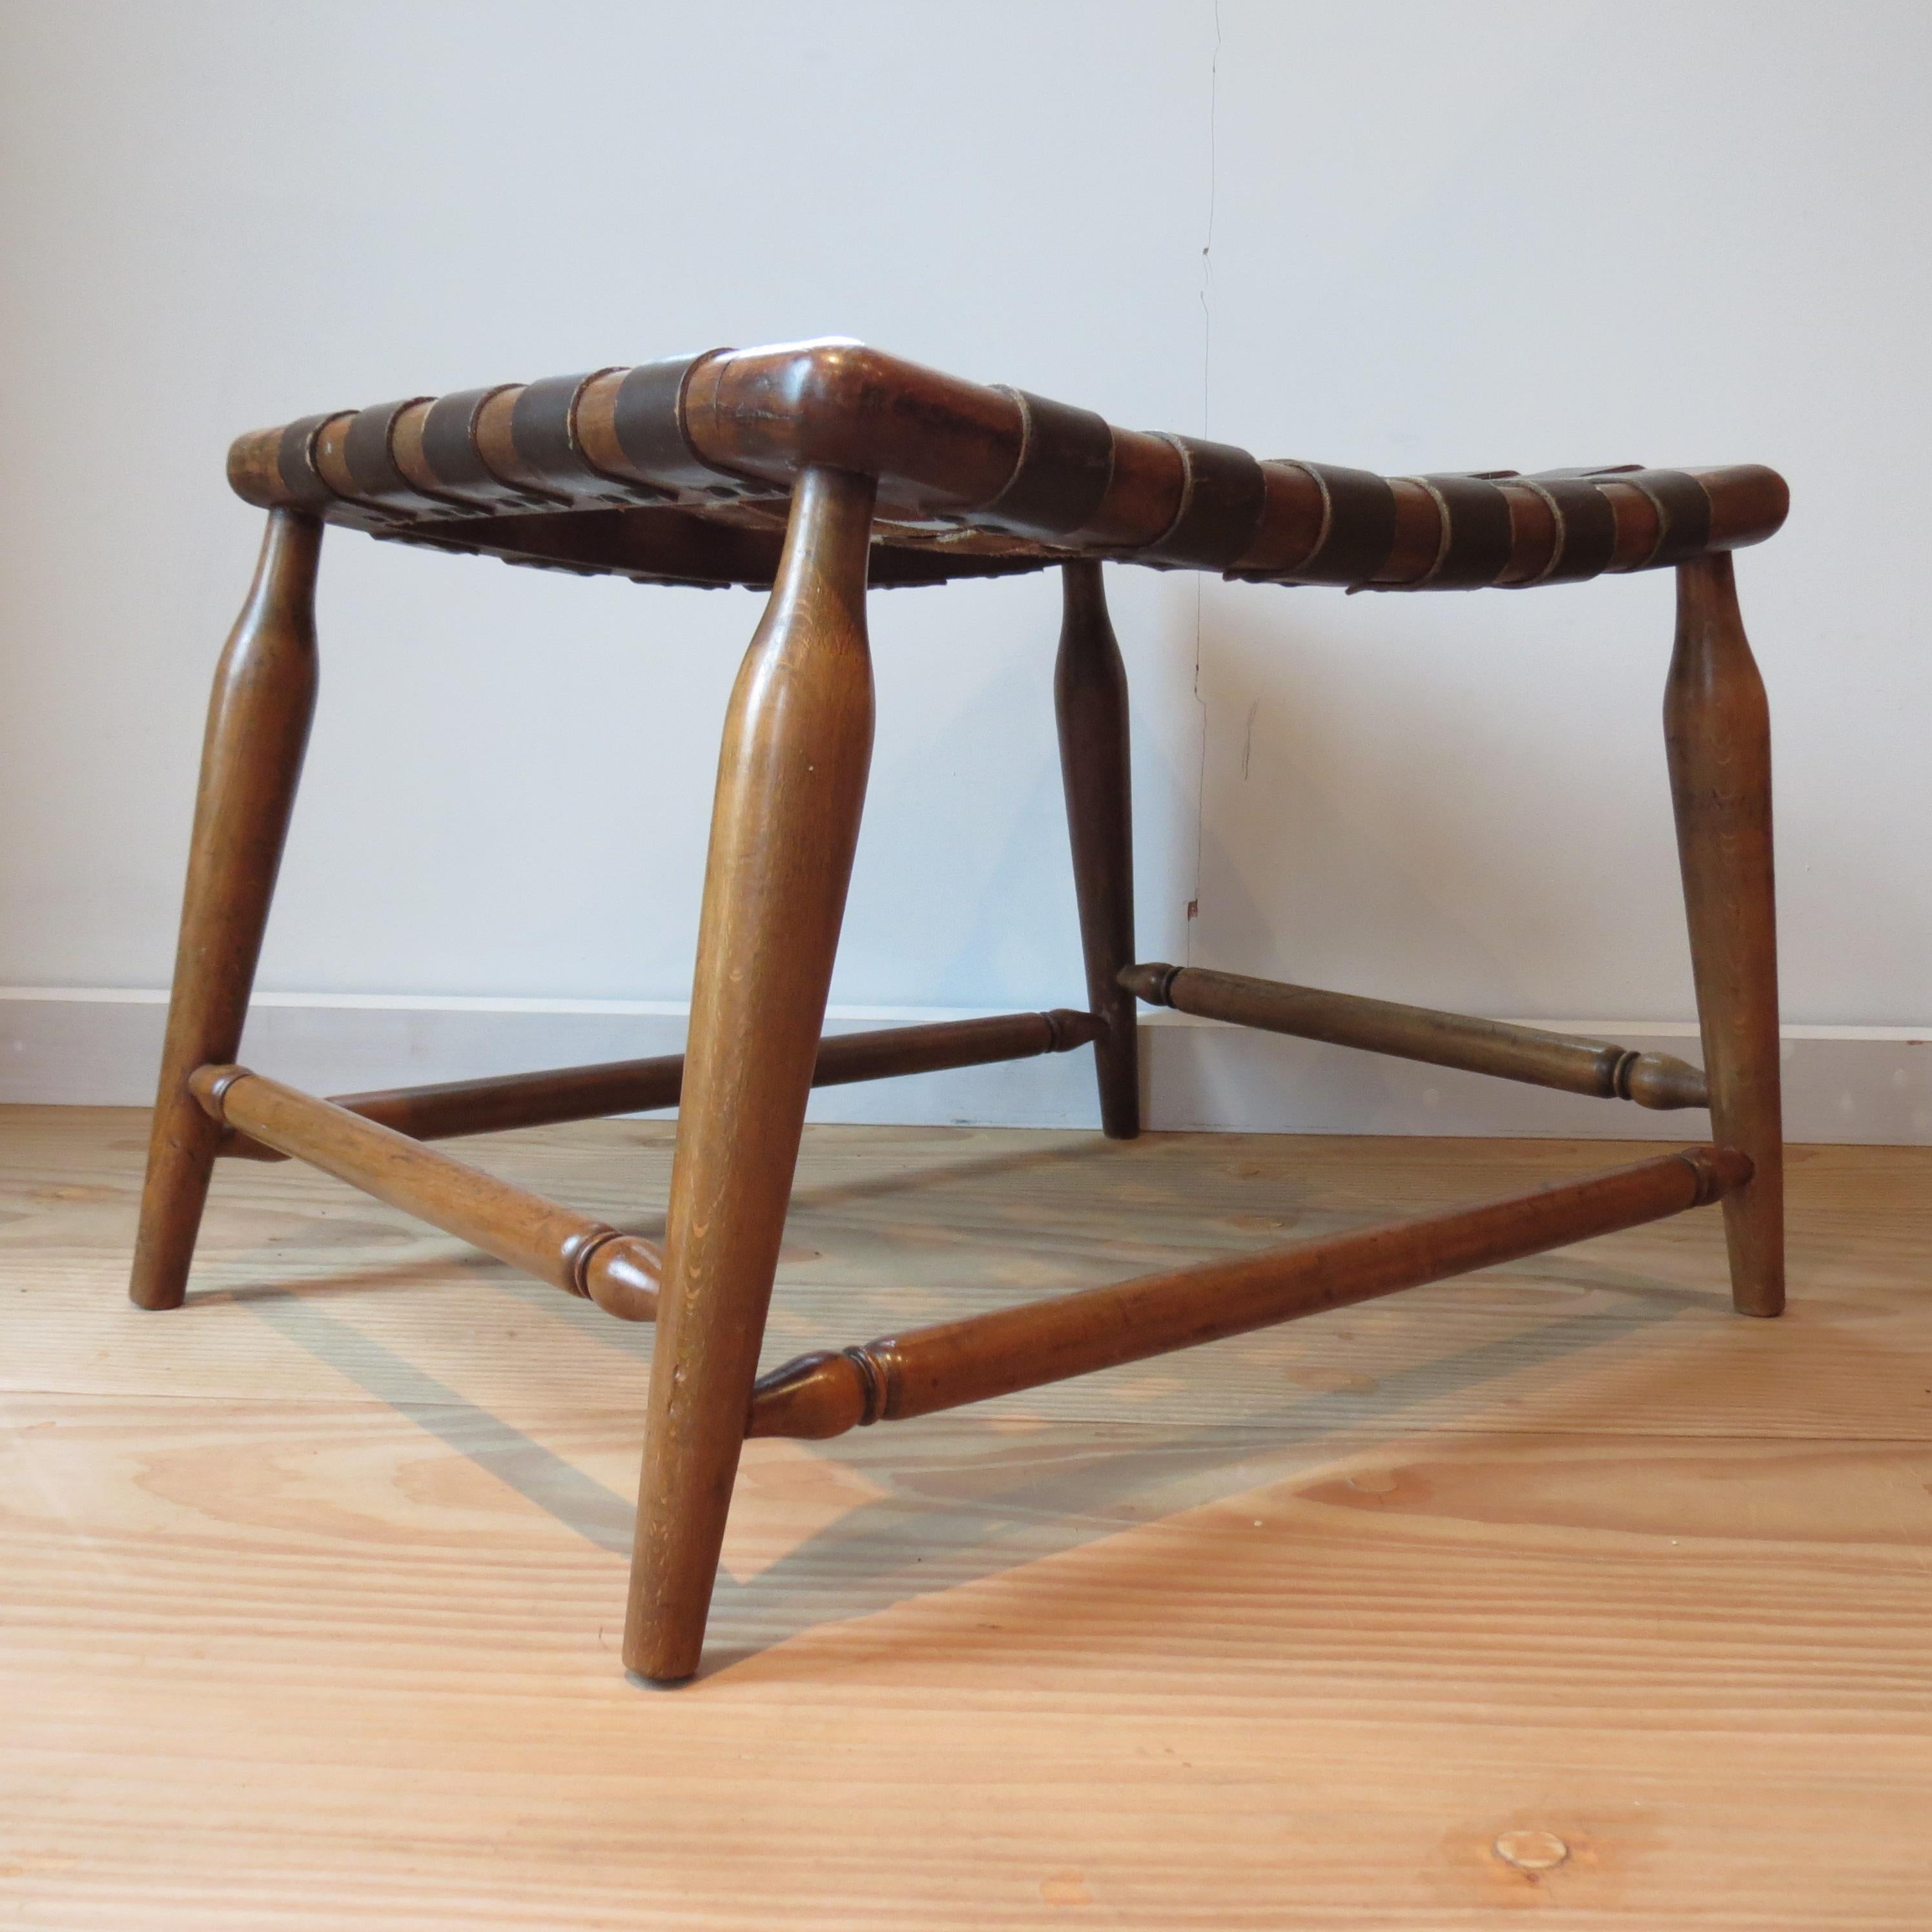 Hand-Crafted 1950s Leather Strap and Wooden Stool